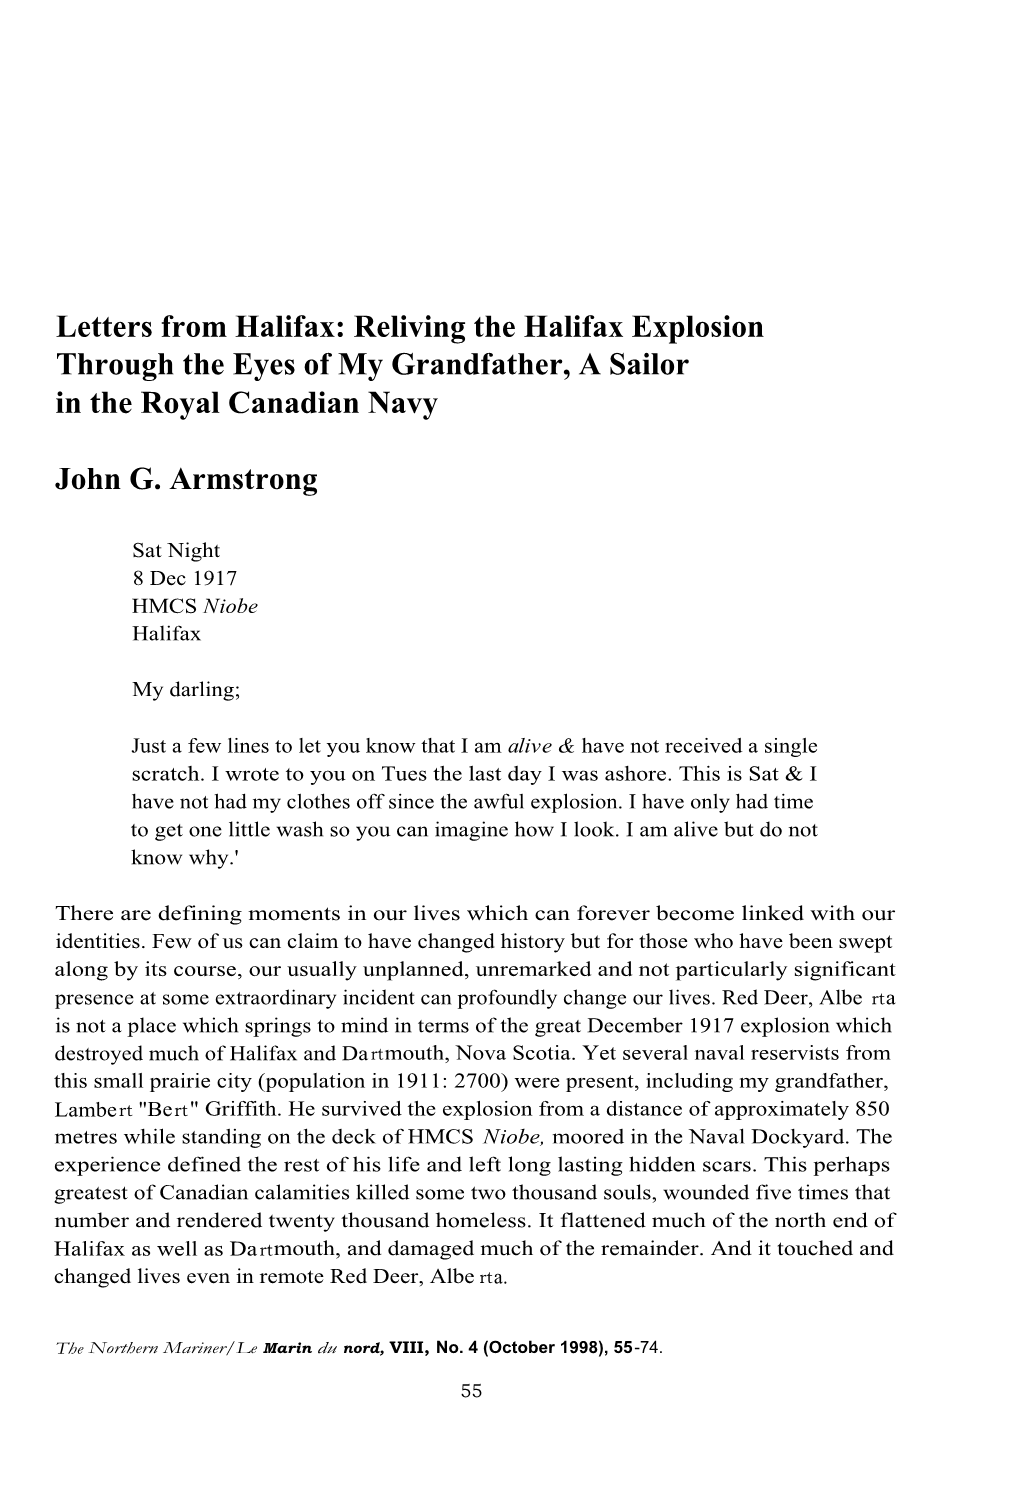 Letters from Halifax: Reliving the Halifax Explosion Through the Eyes of My Grandfather, a Sailor in the Royal Canadian Navy